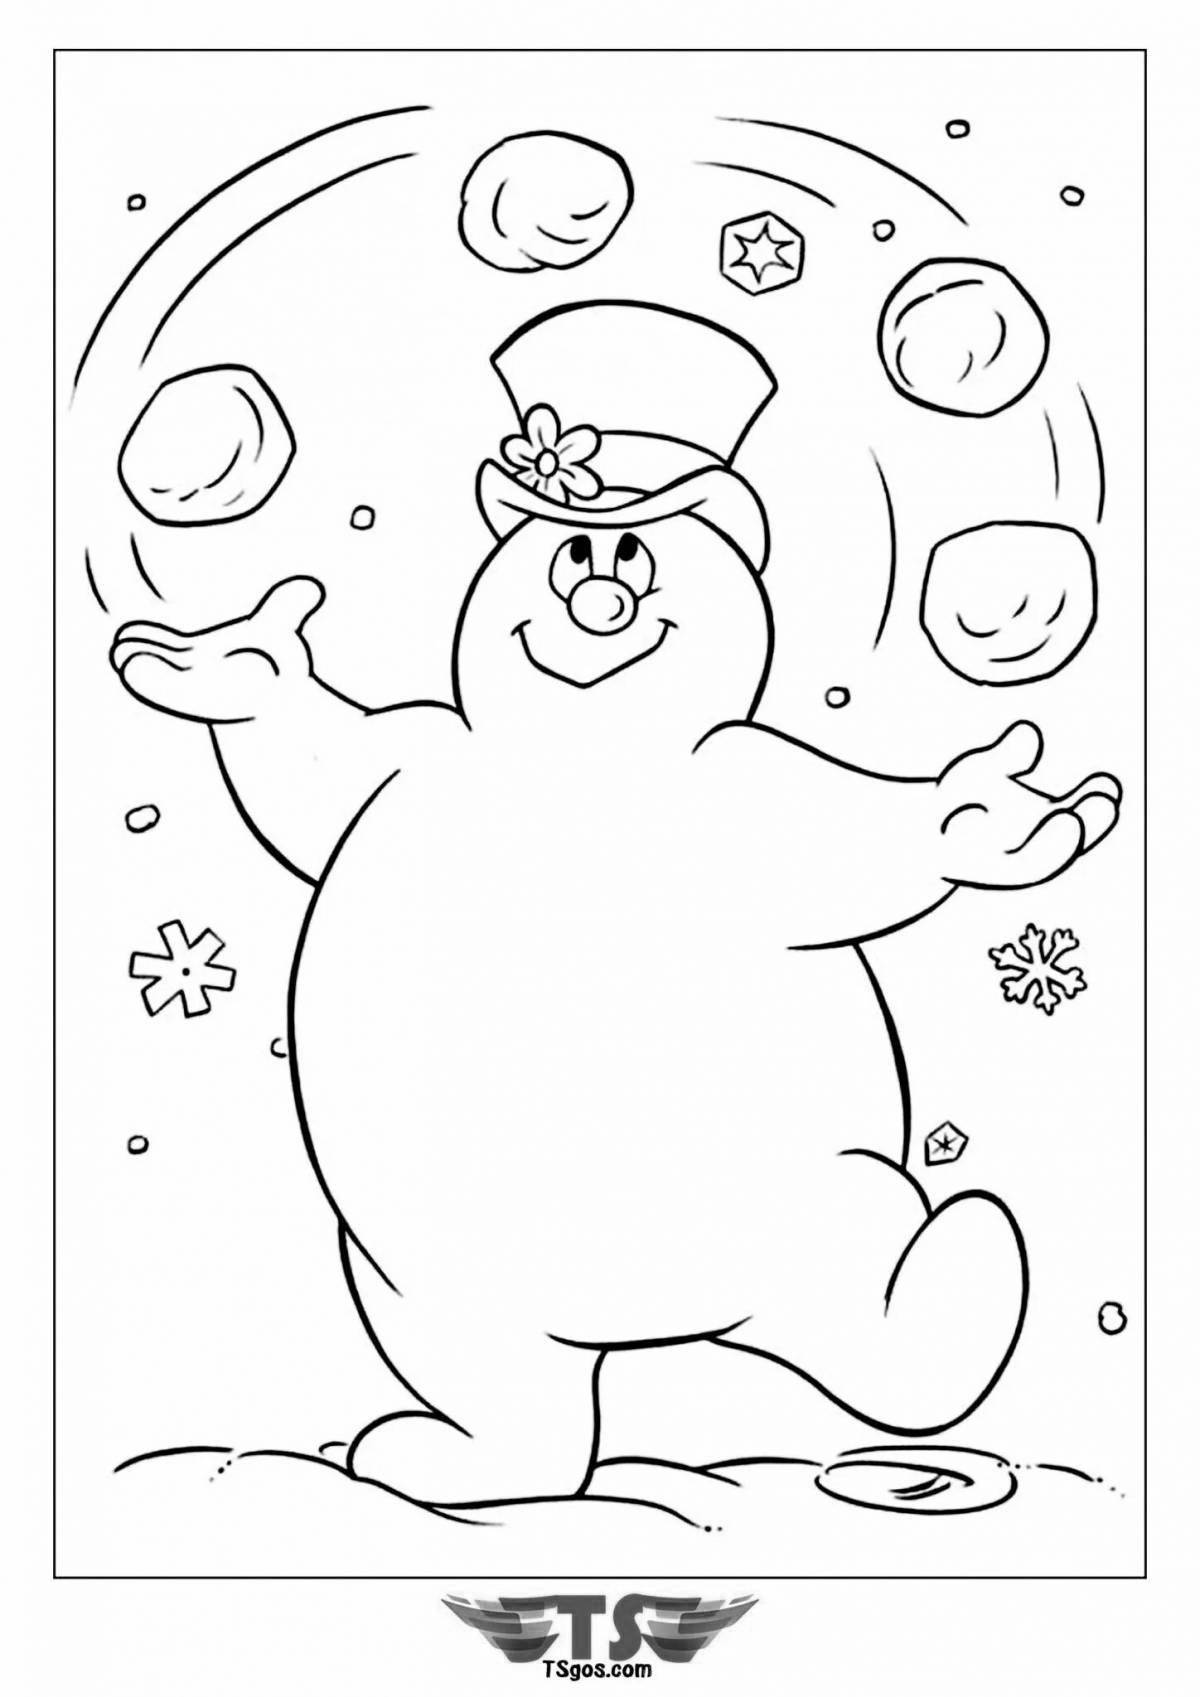 Exciting snowball coloring book